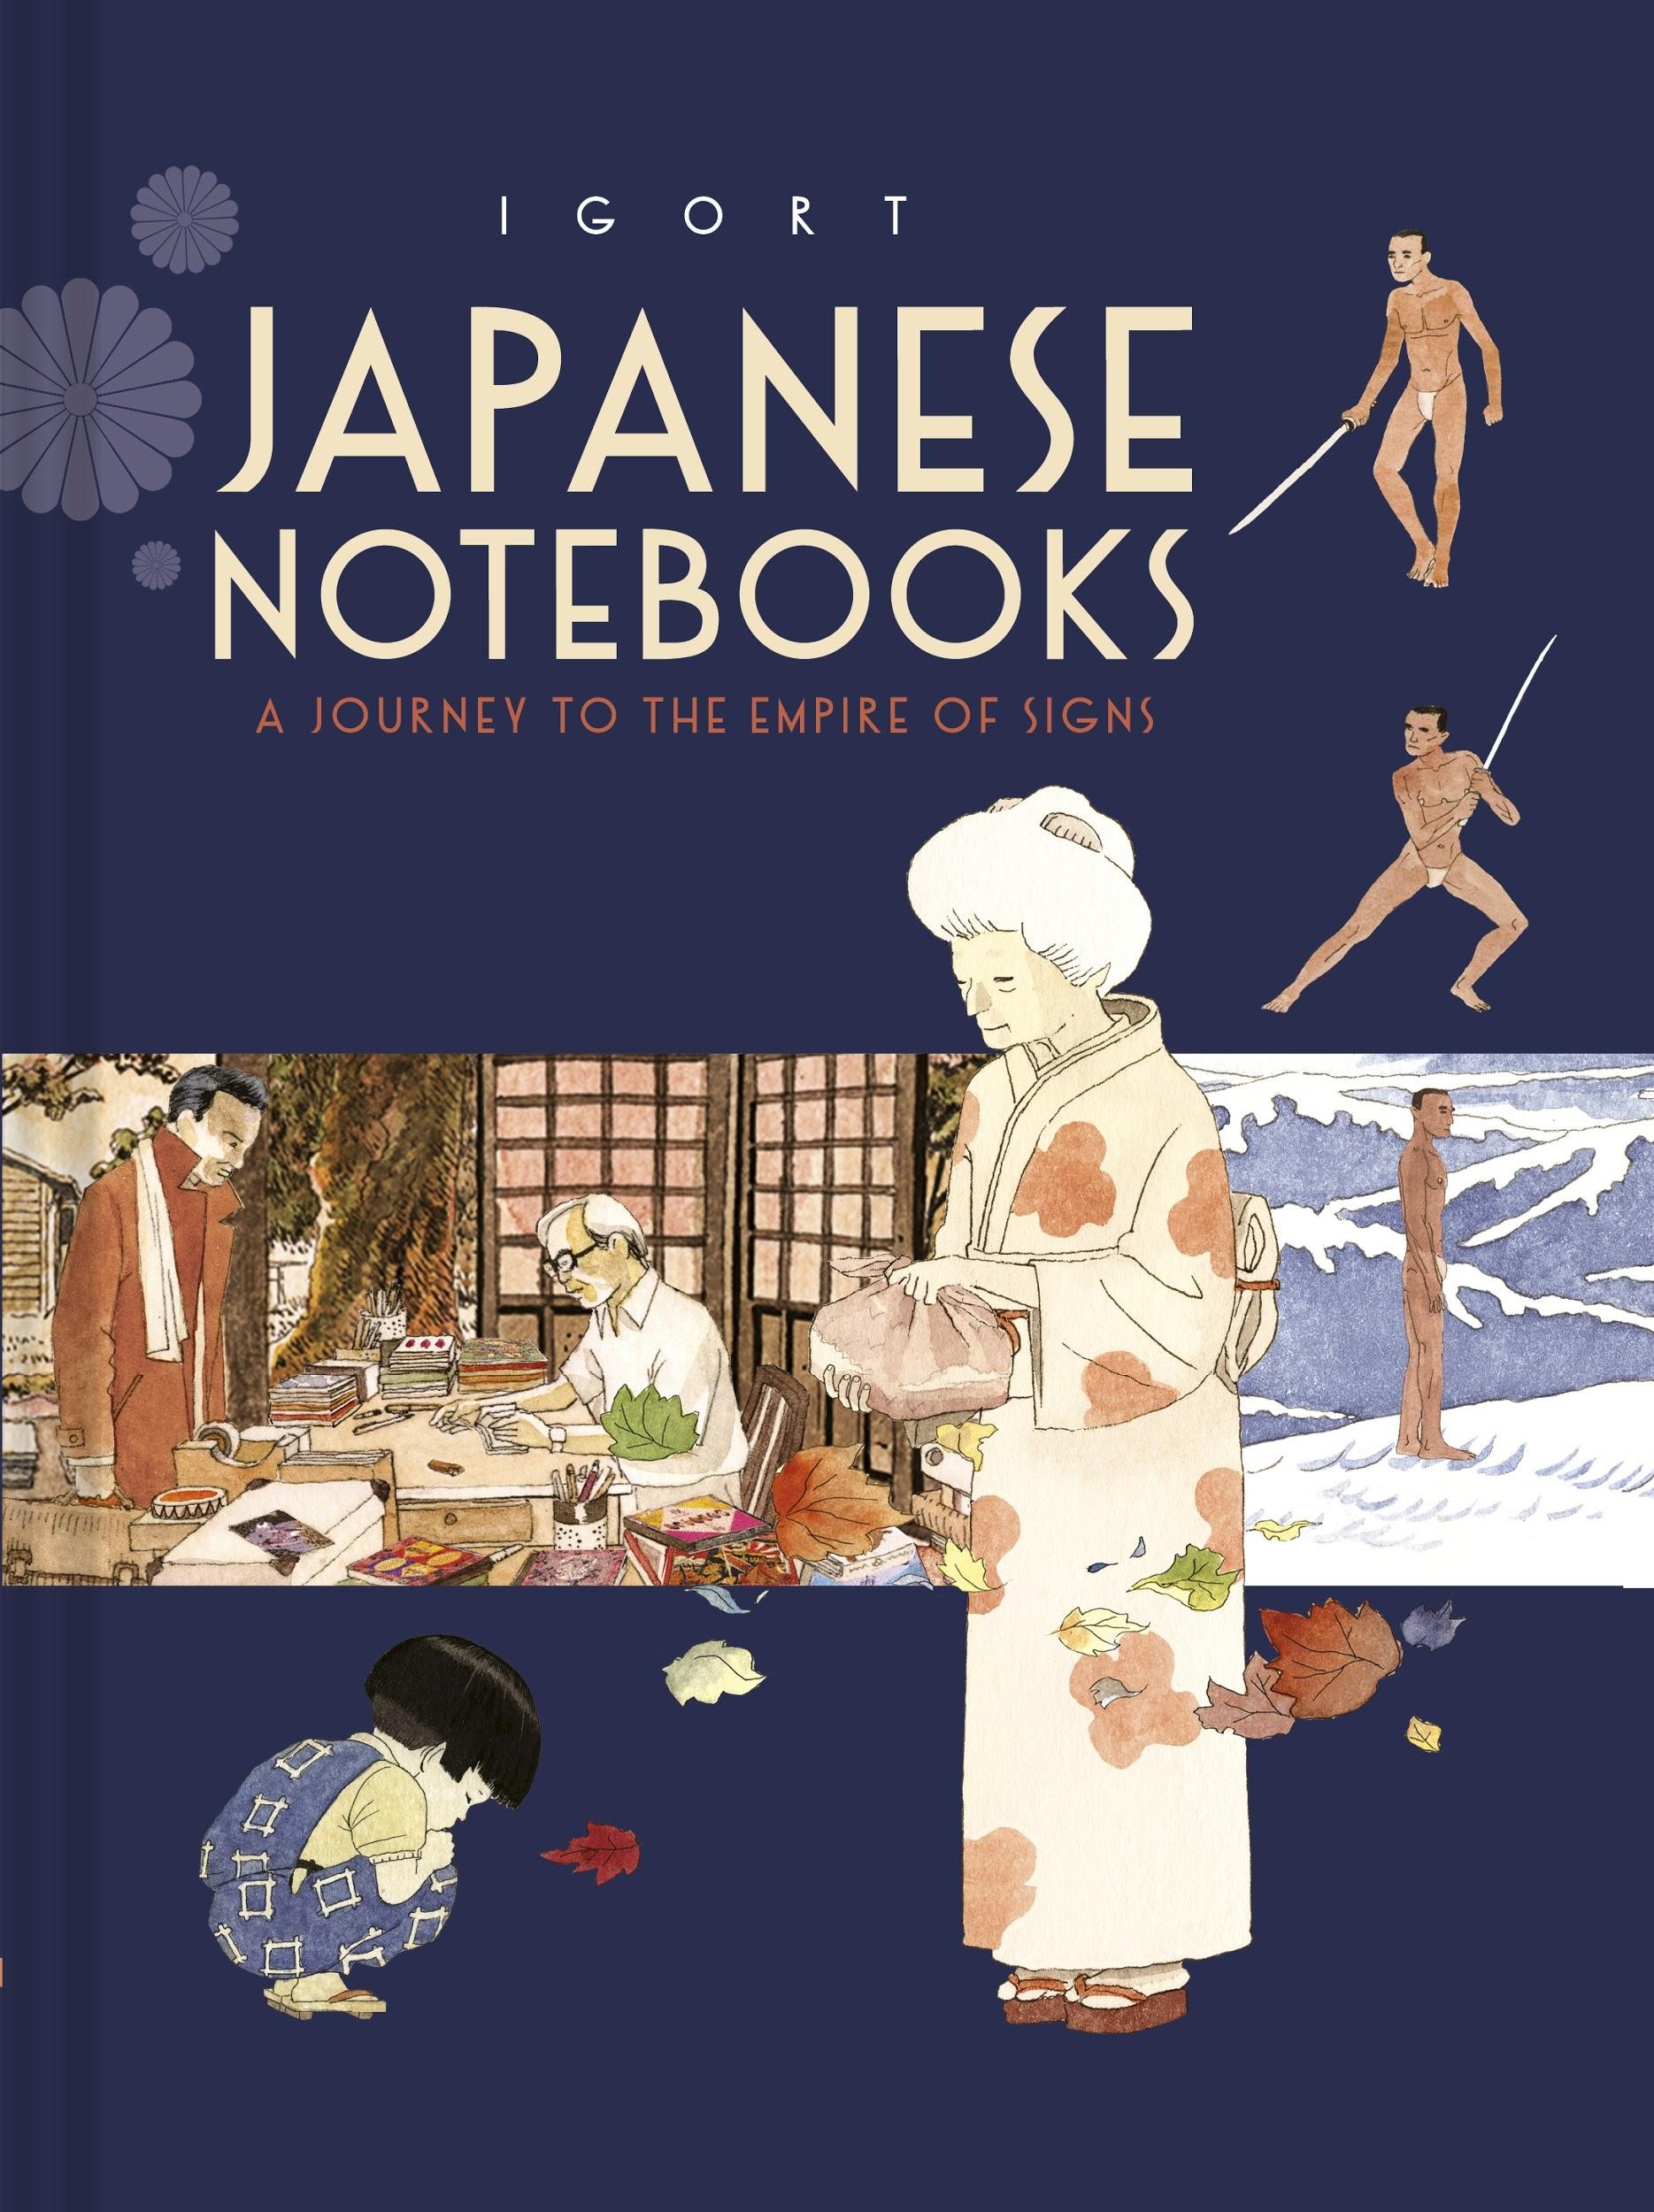 Japanese Notebooks book cover